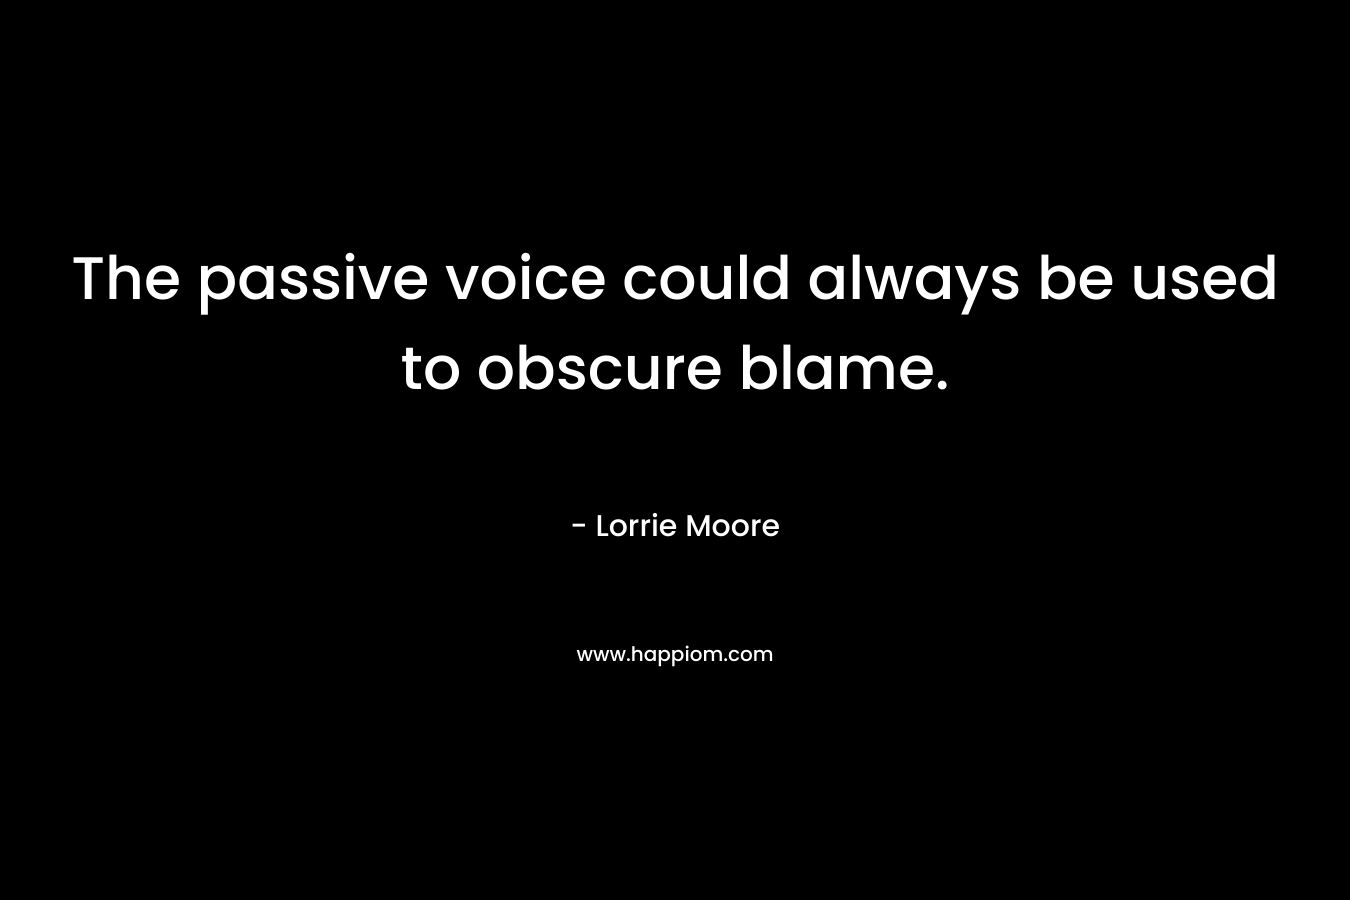 The passive voice could always be used to obscure blame.